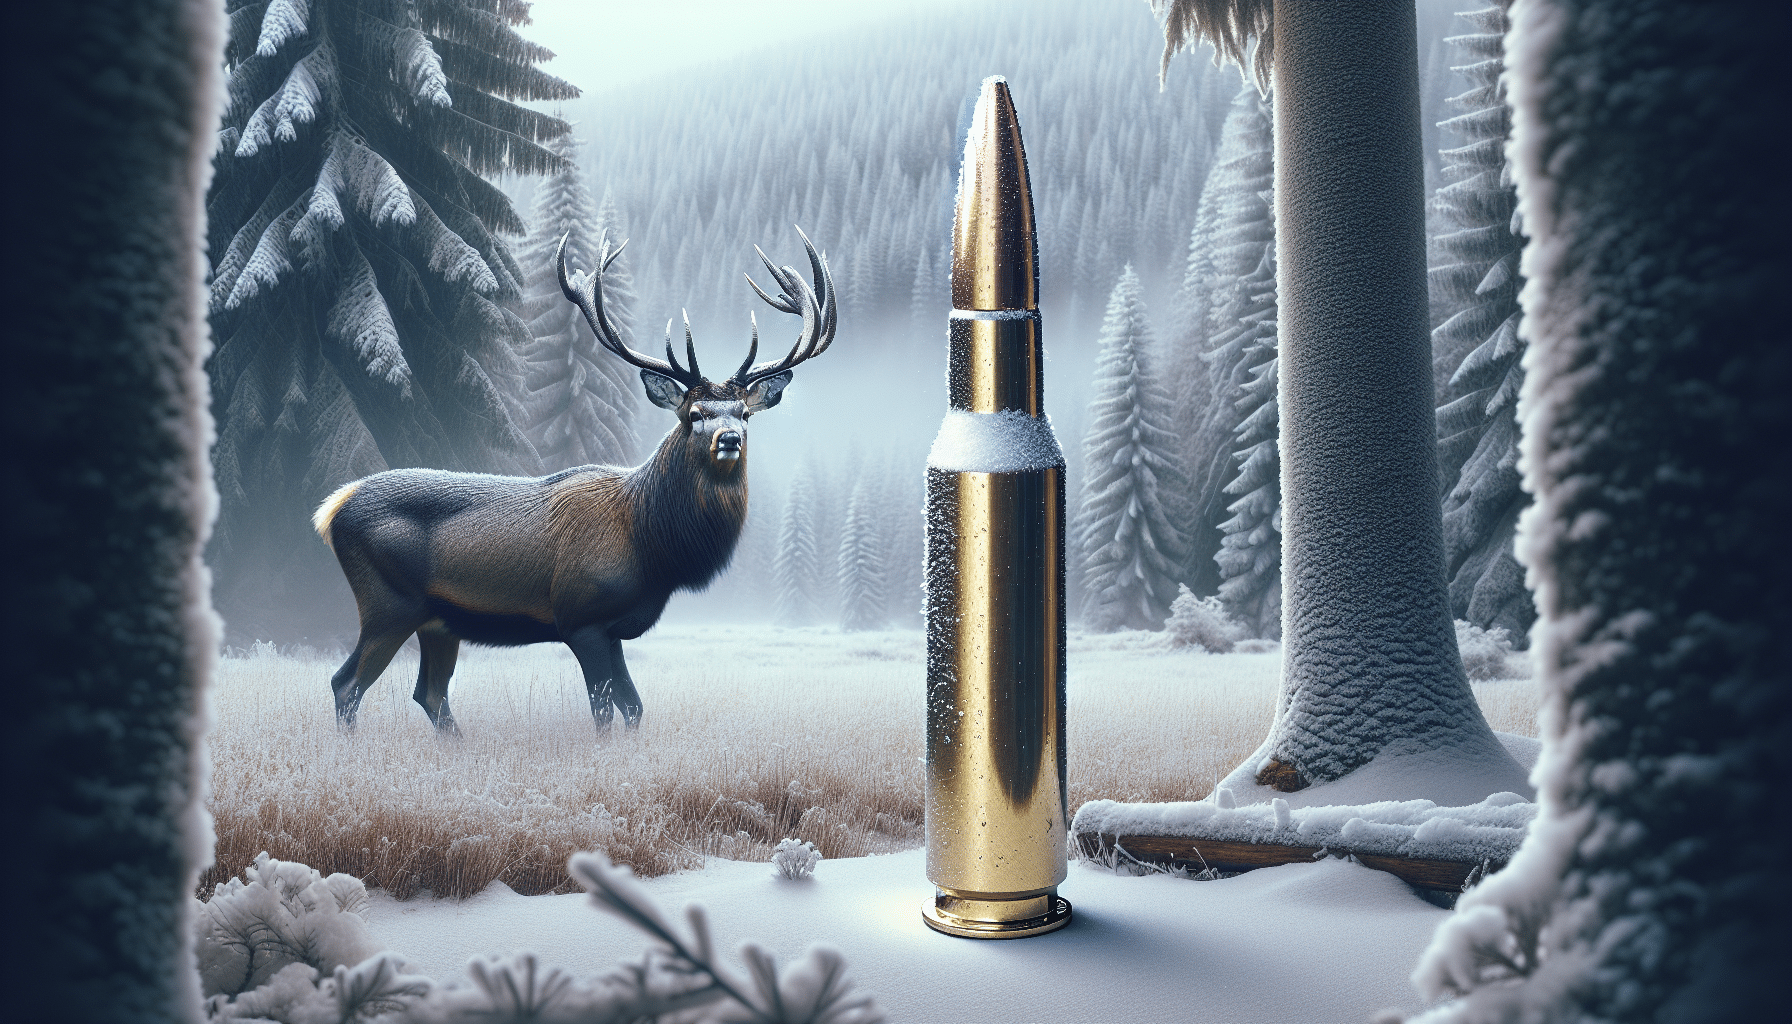 Generate an image of a straight-wall cartridge and a deer in the same environment without any people or logos. The setting is a snow-dusted forest in the middle of winter. On the left side is a straight-wall cartridge excellently rendered in extreme detail and magnified to display its design. Meanwhile, in the background on the right side, a majestic deer that is calmly grazing in the tranquil setting, its breath visible in the frosty atmosphere. Ensure that no specific brand names or text are displayed in this image.